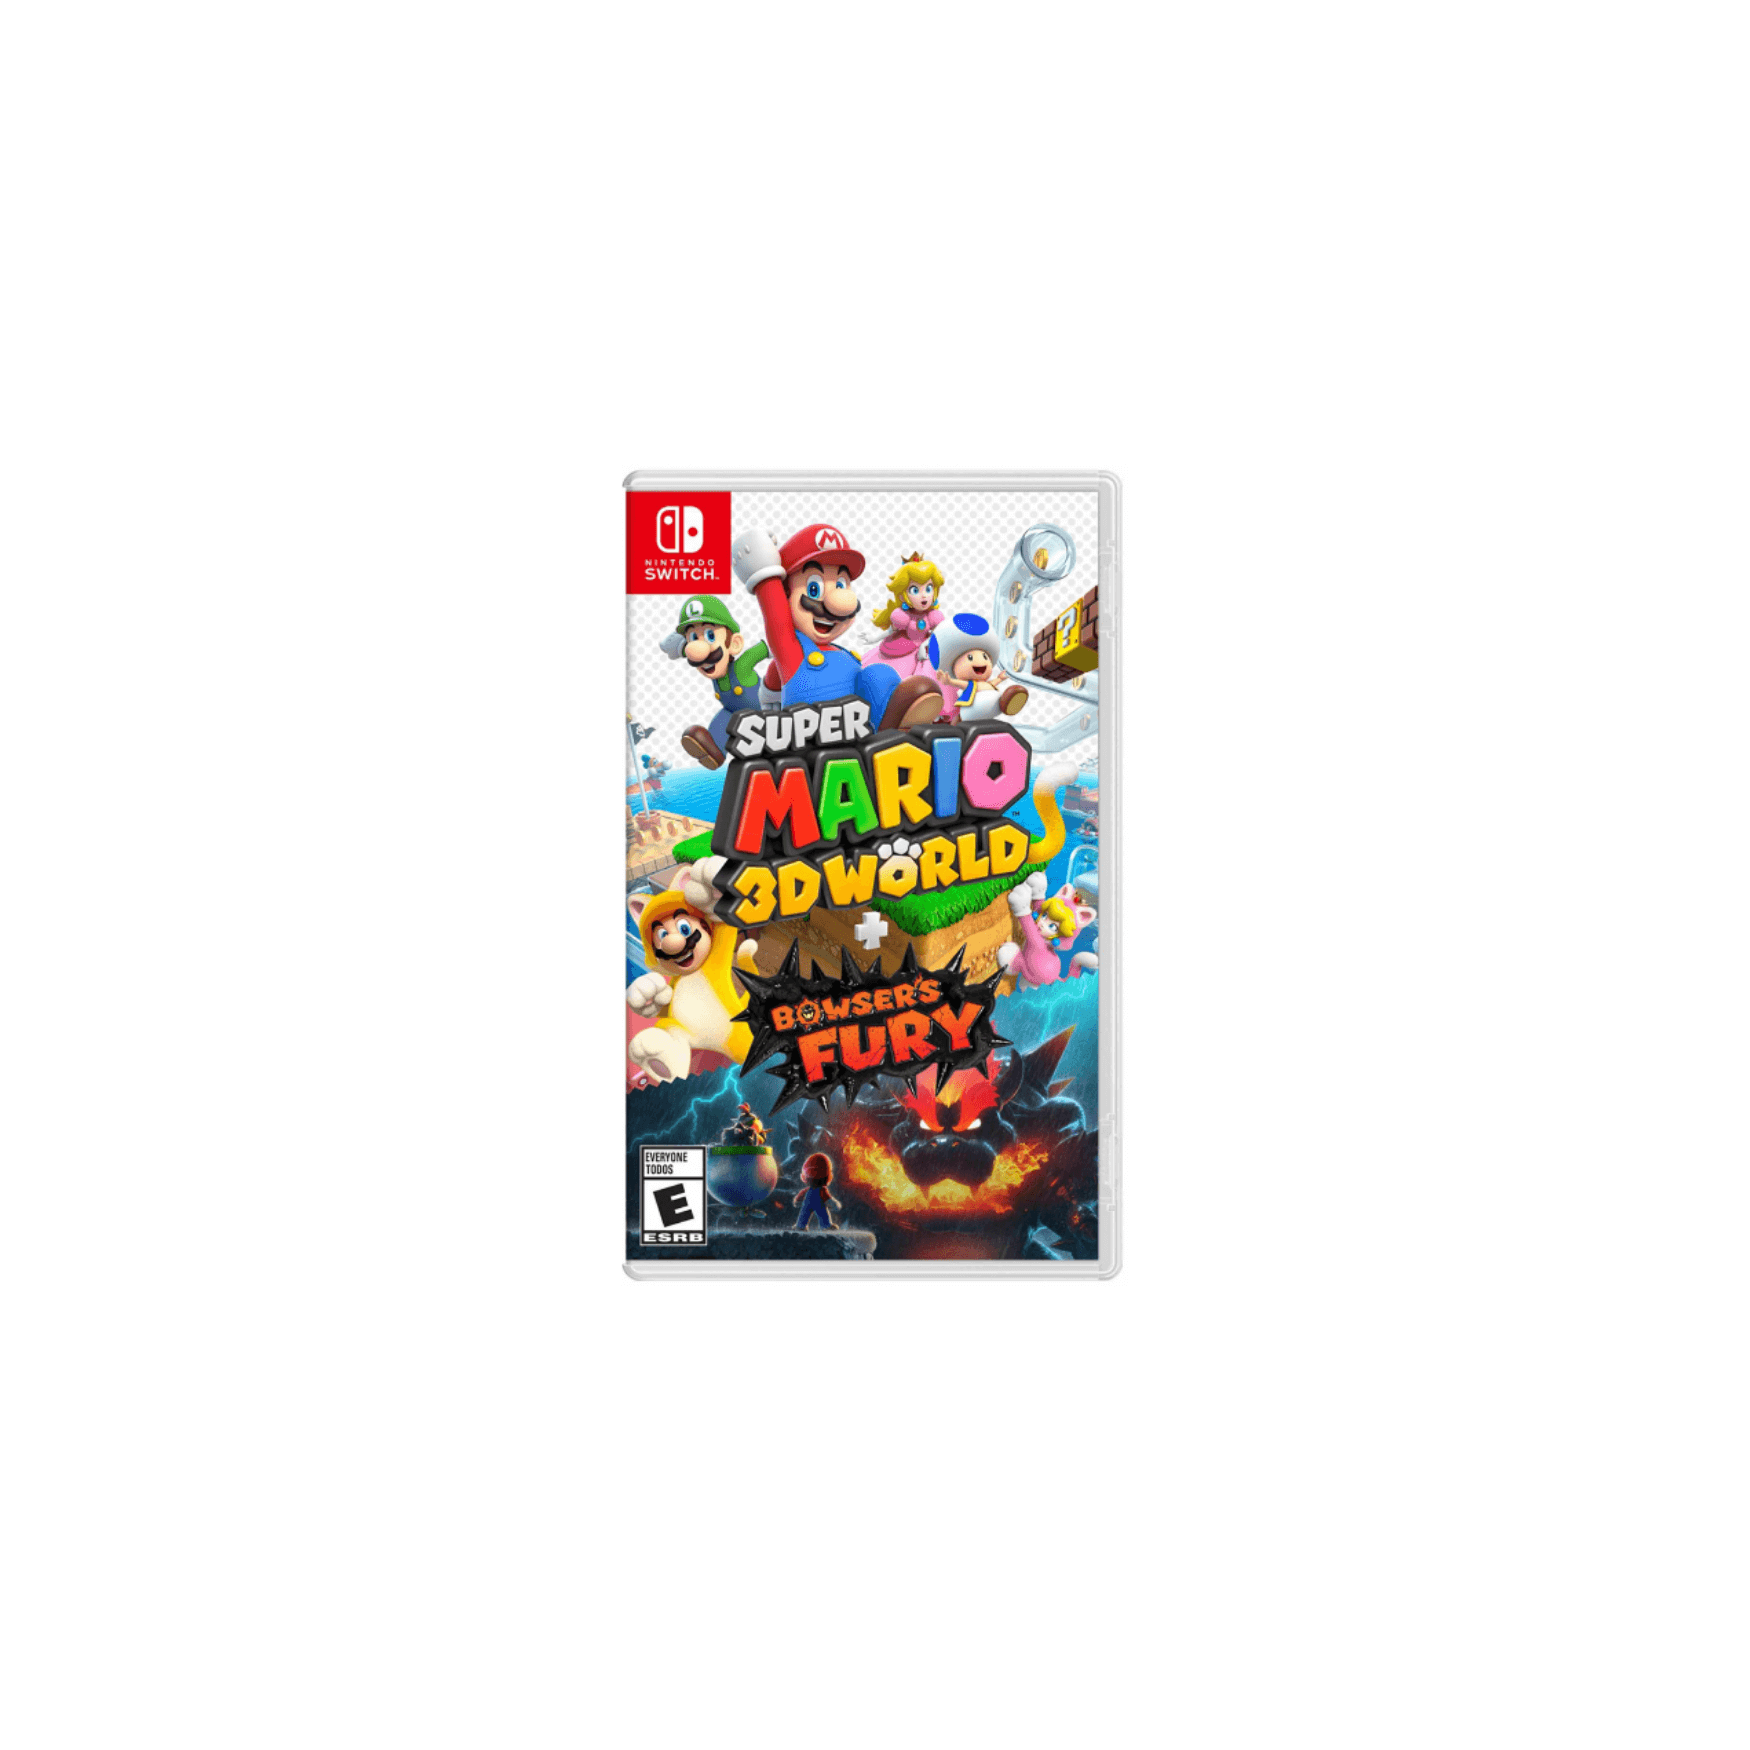 Nintendo Switch Game Super Mario 3D World + Bowser's Fury - for Nintendo Switch